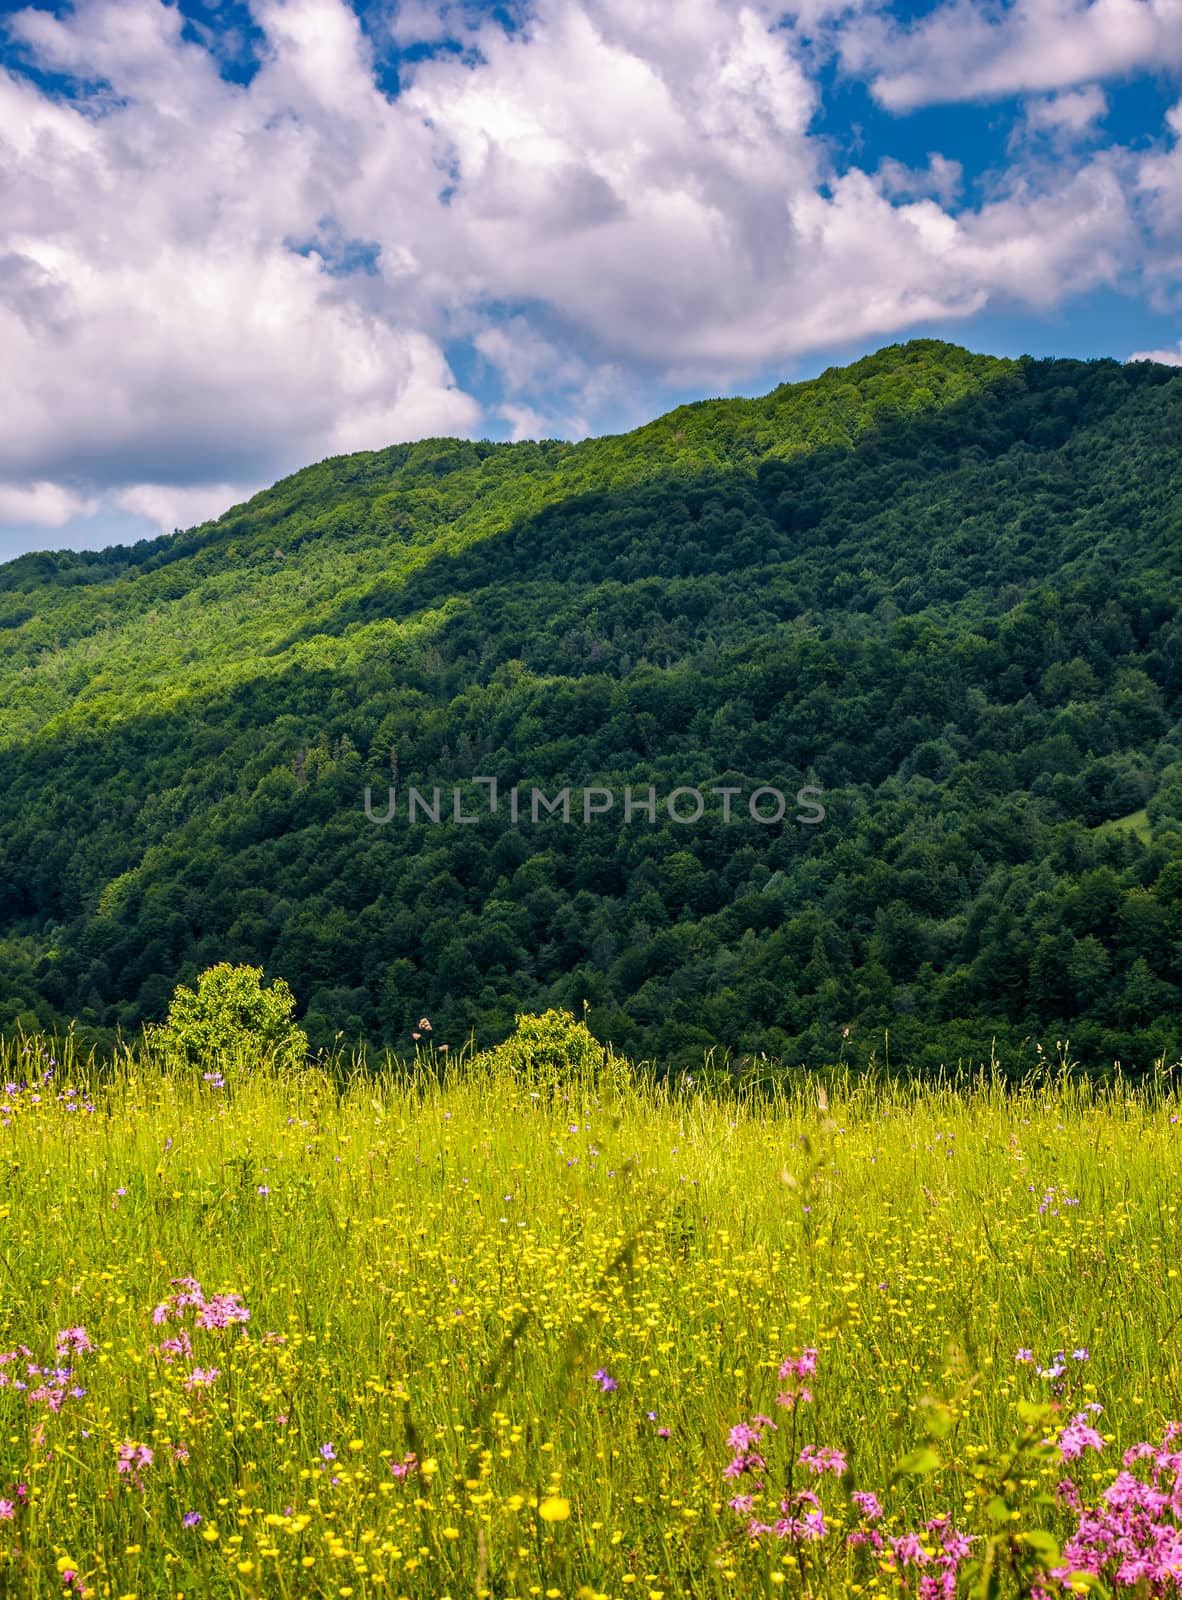 grassy pasture with wild flowers in mountains by Pellinni